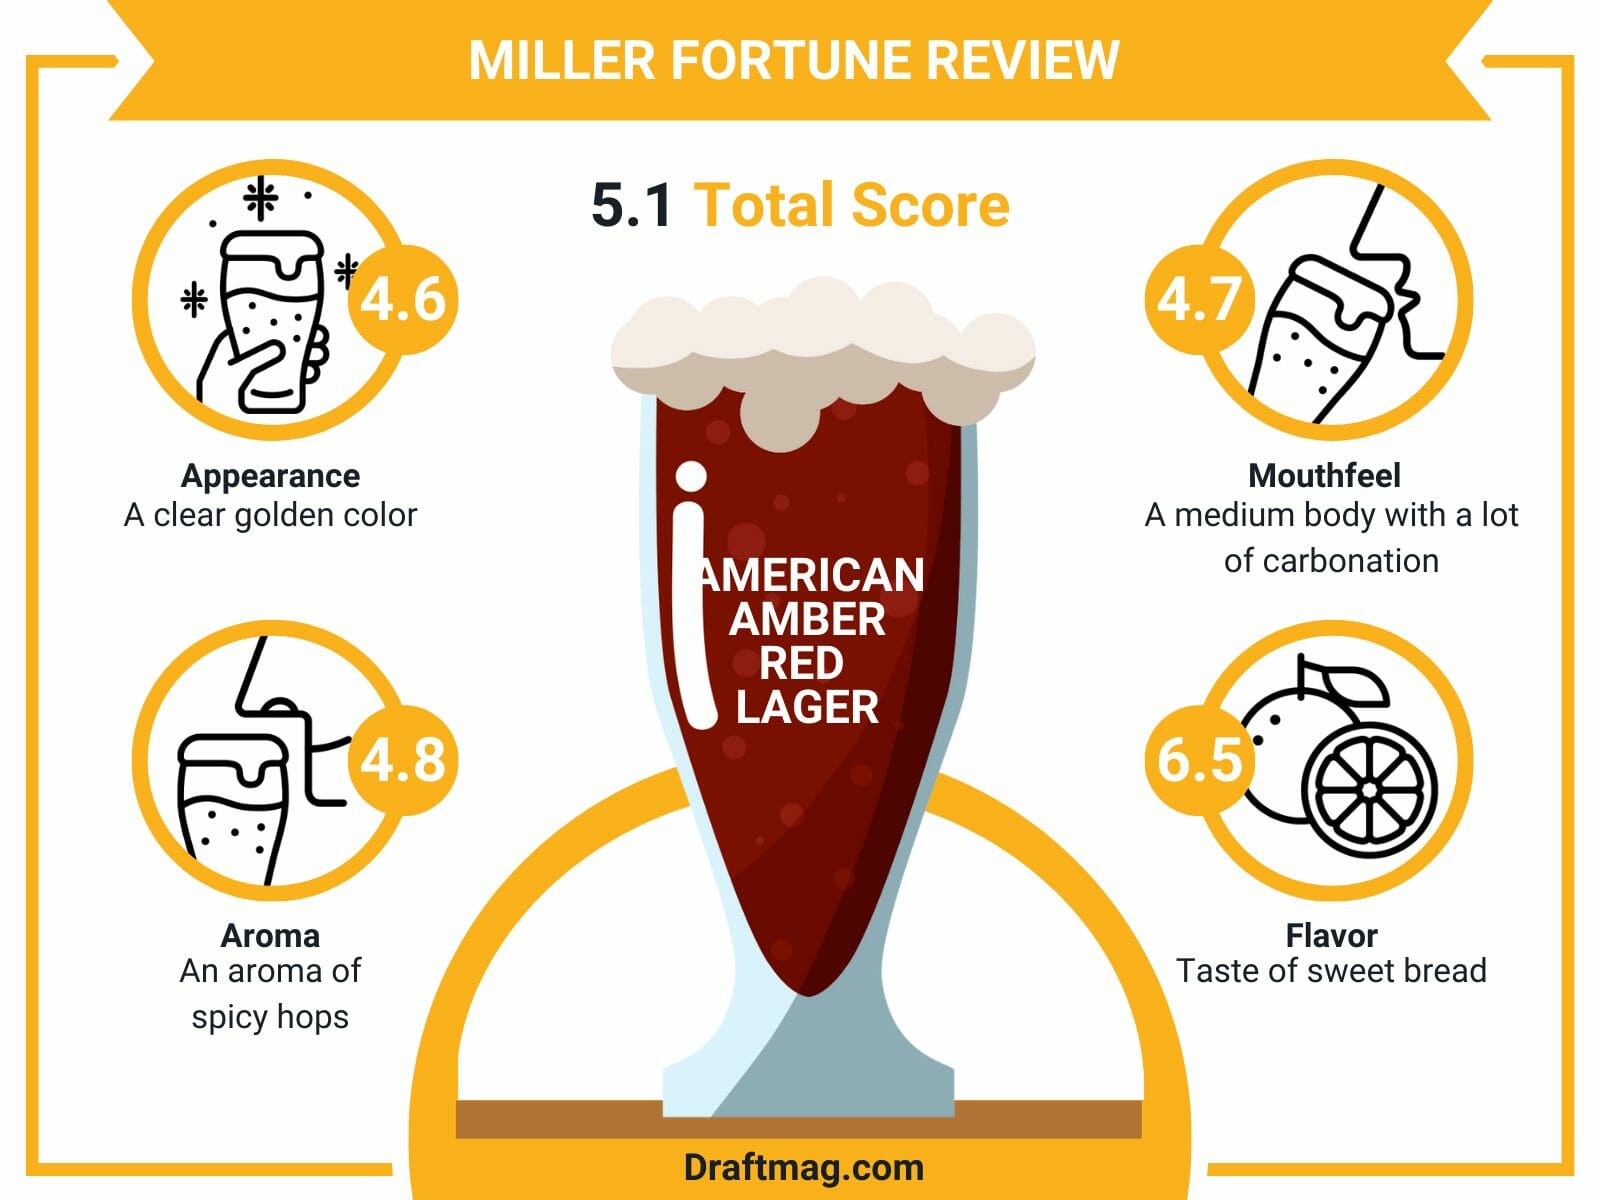 Miller fortune review infographics